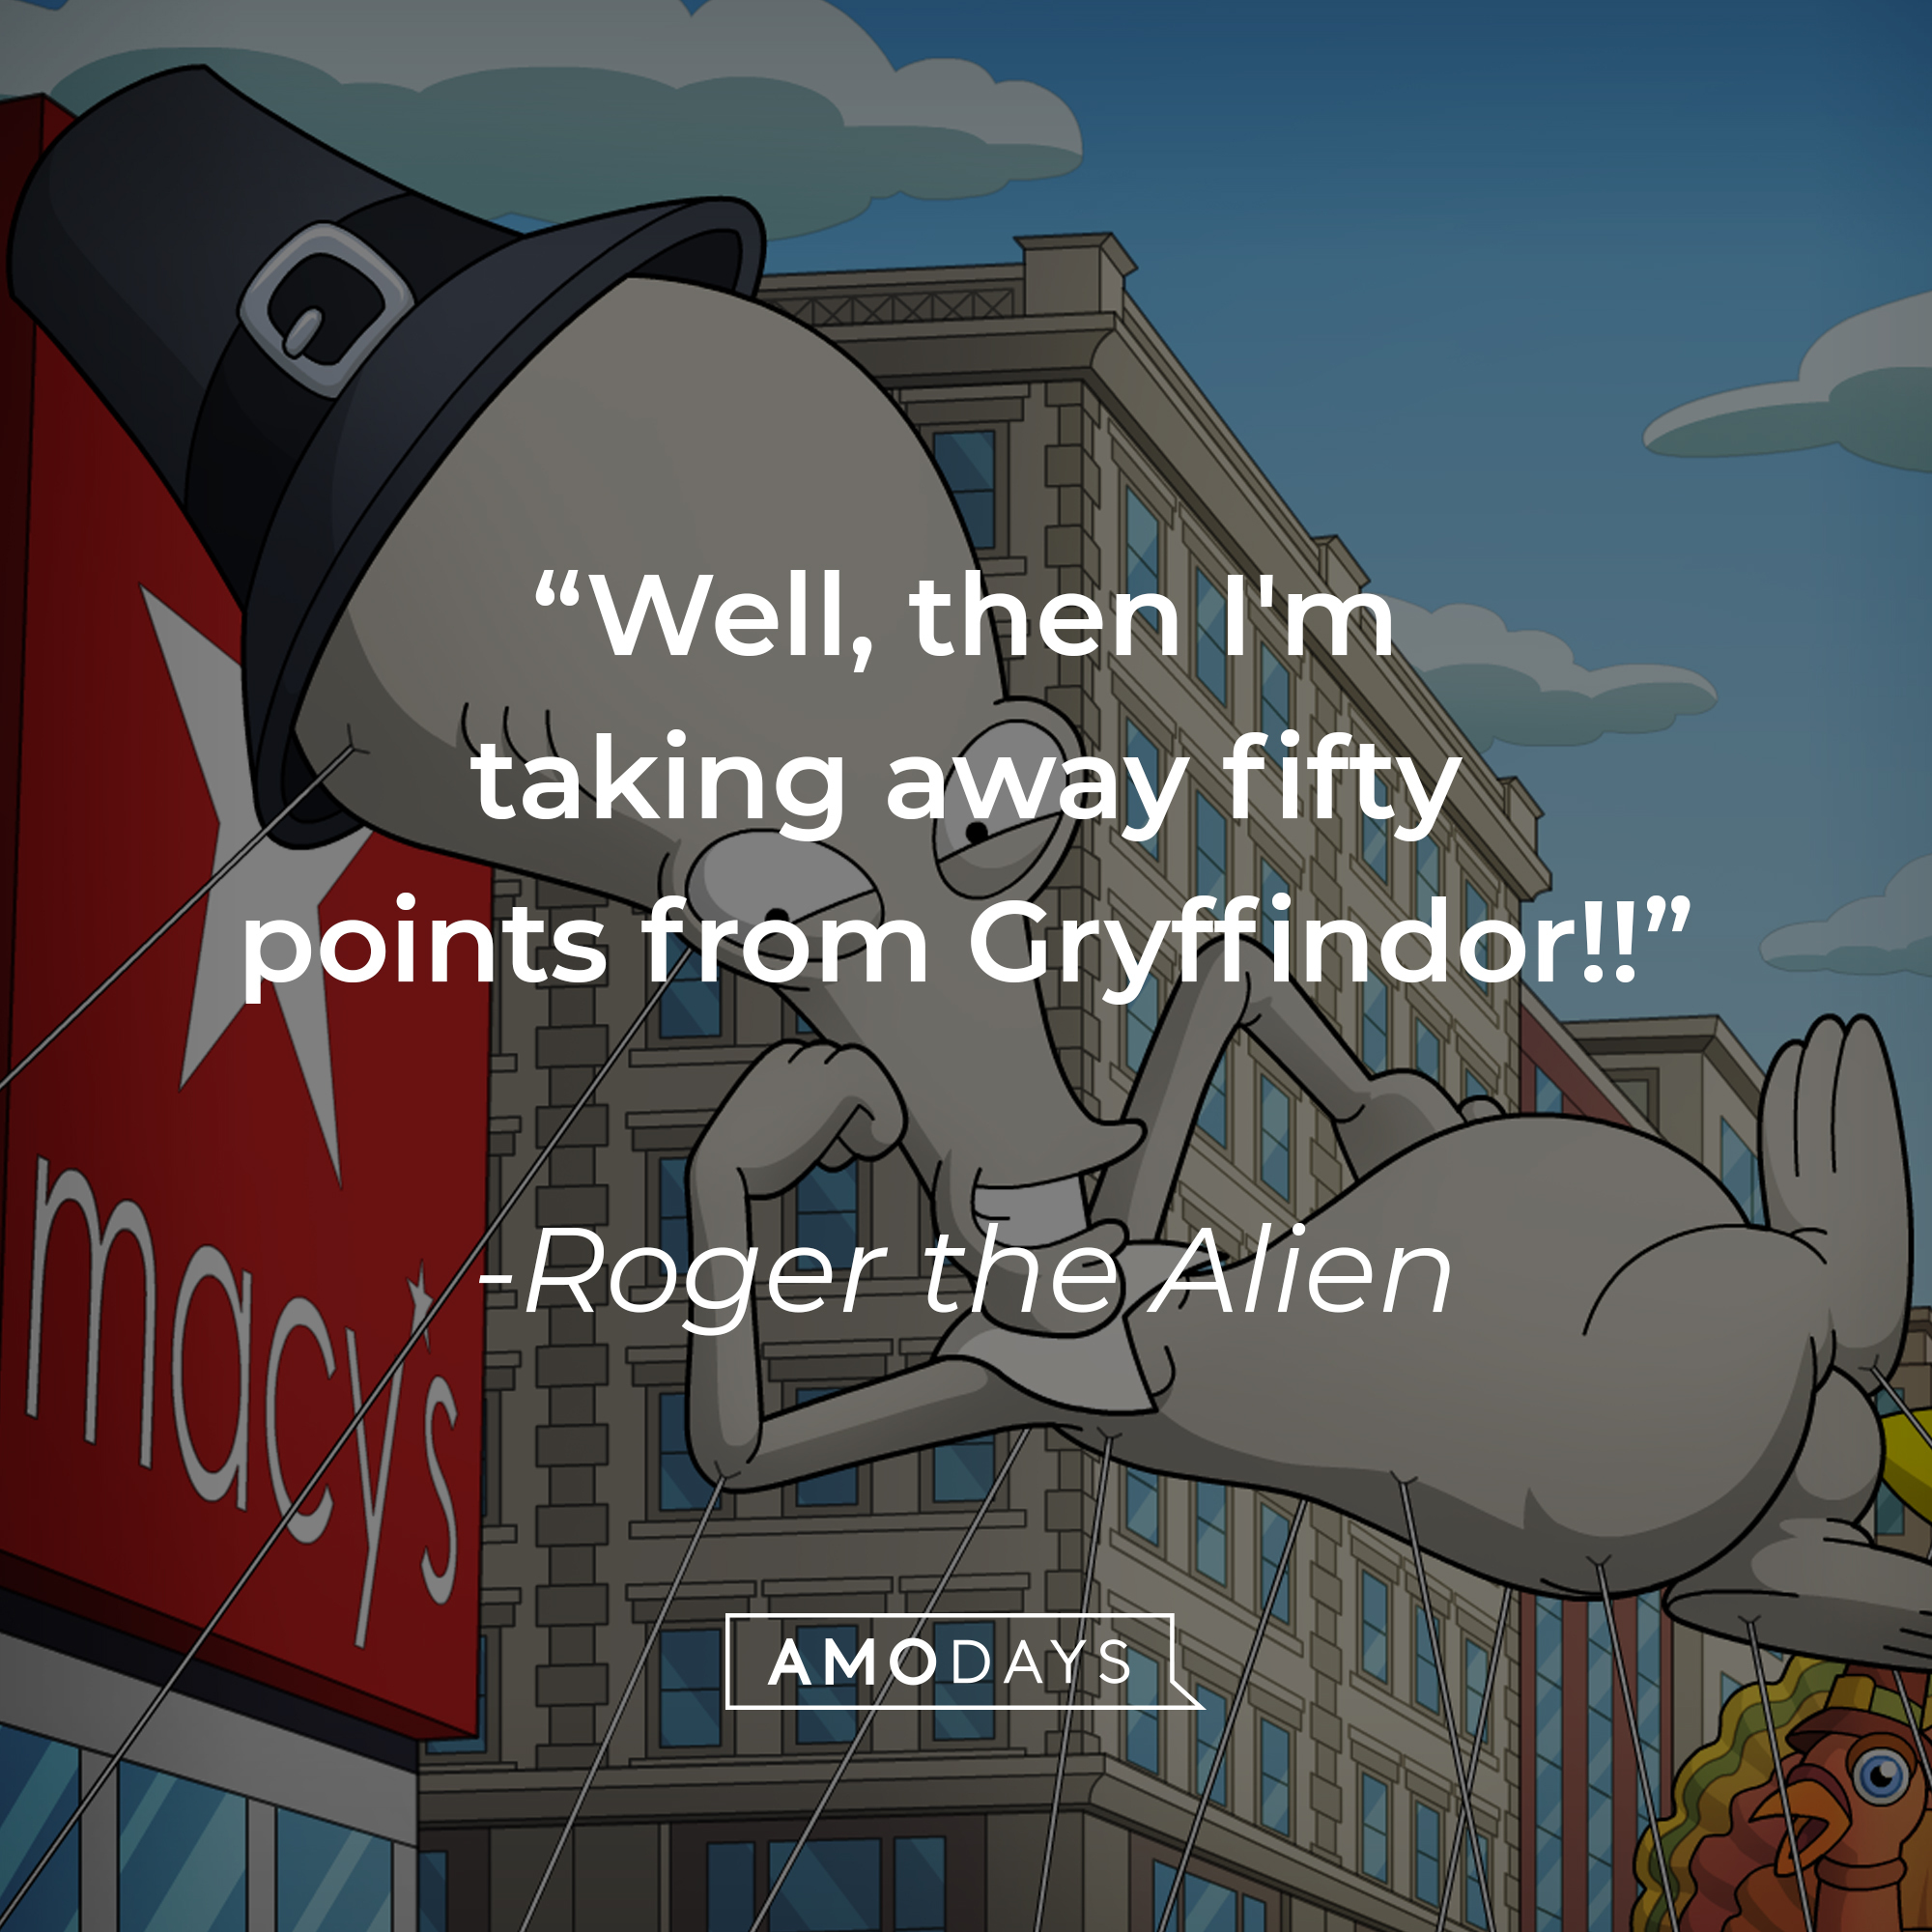 Roger the Alien’s quote: “Well, then I'm taking away fifty points from Gryffindor!!” | Source: facebook.com/AmericanDad